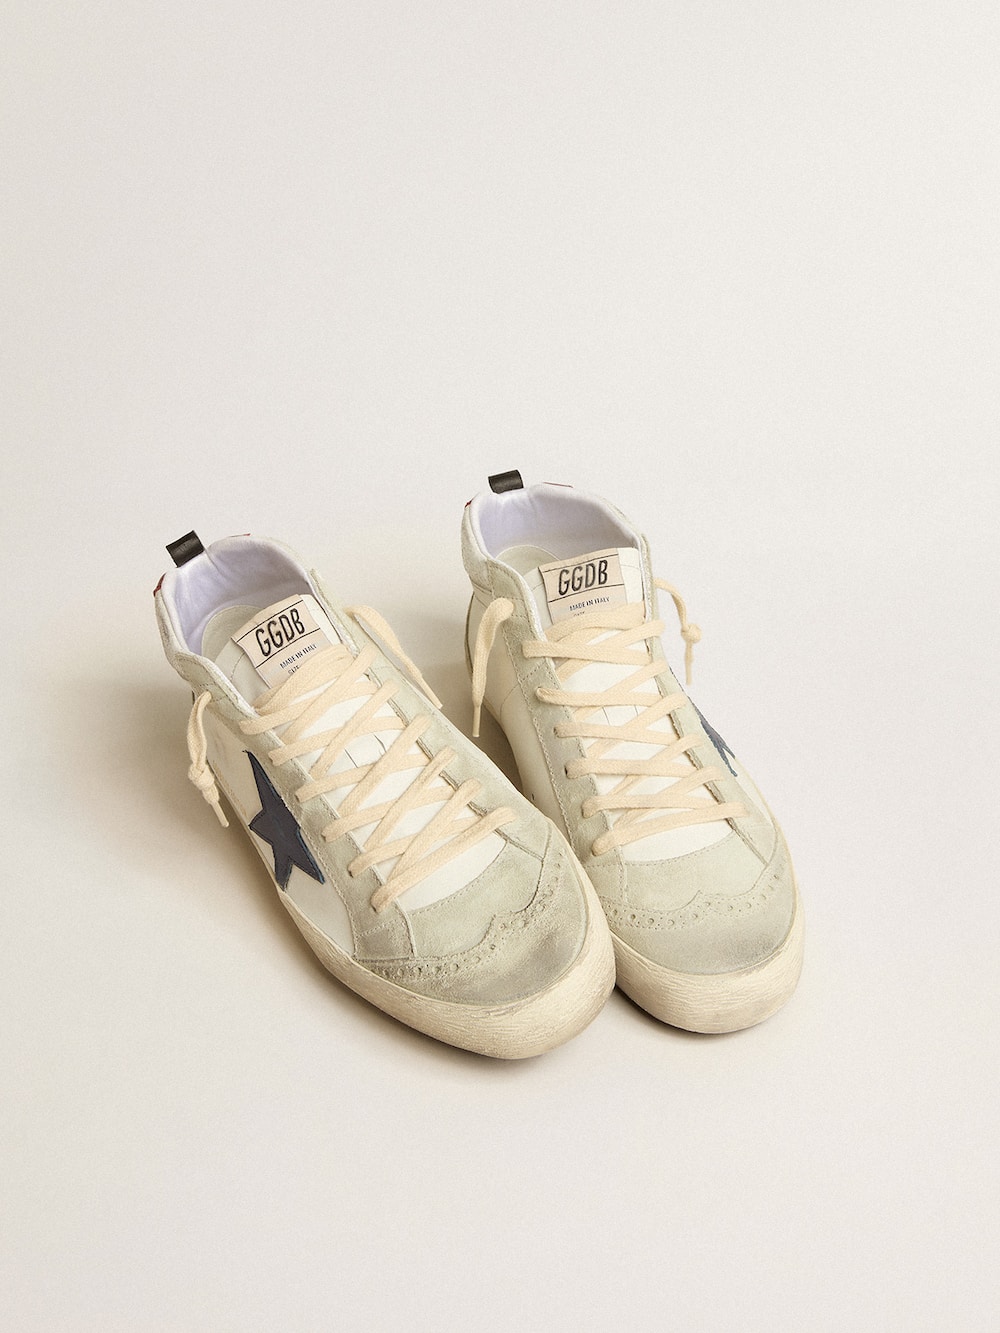 Golden Goose - Men's Mid Star LTD with blue leather star and white nappa leather flash in 